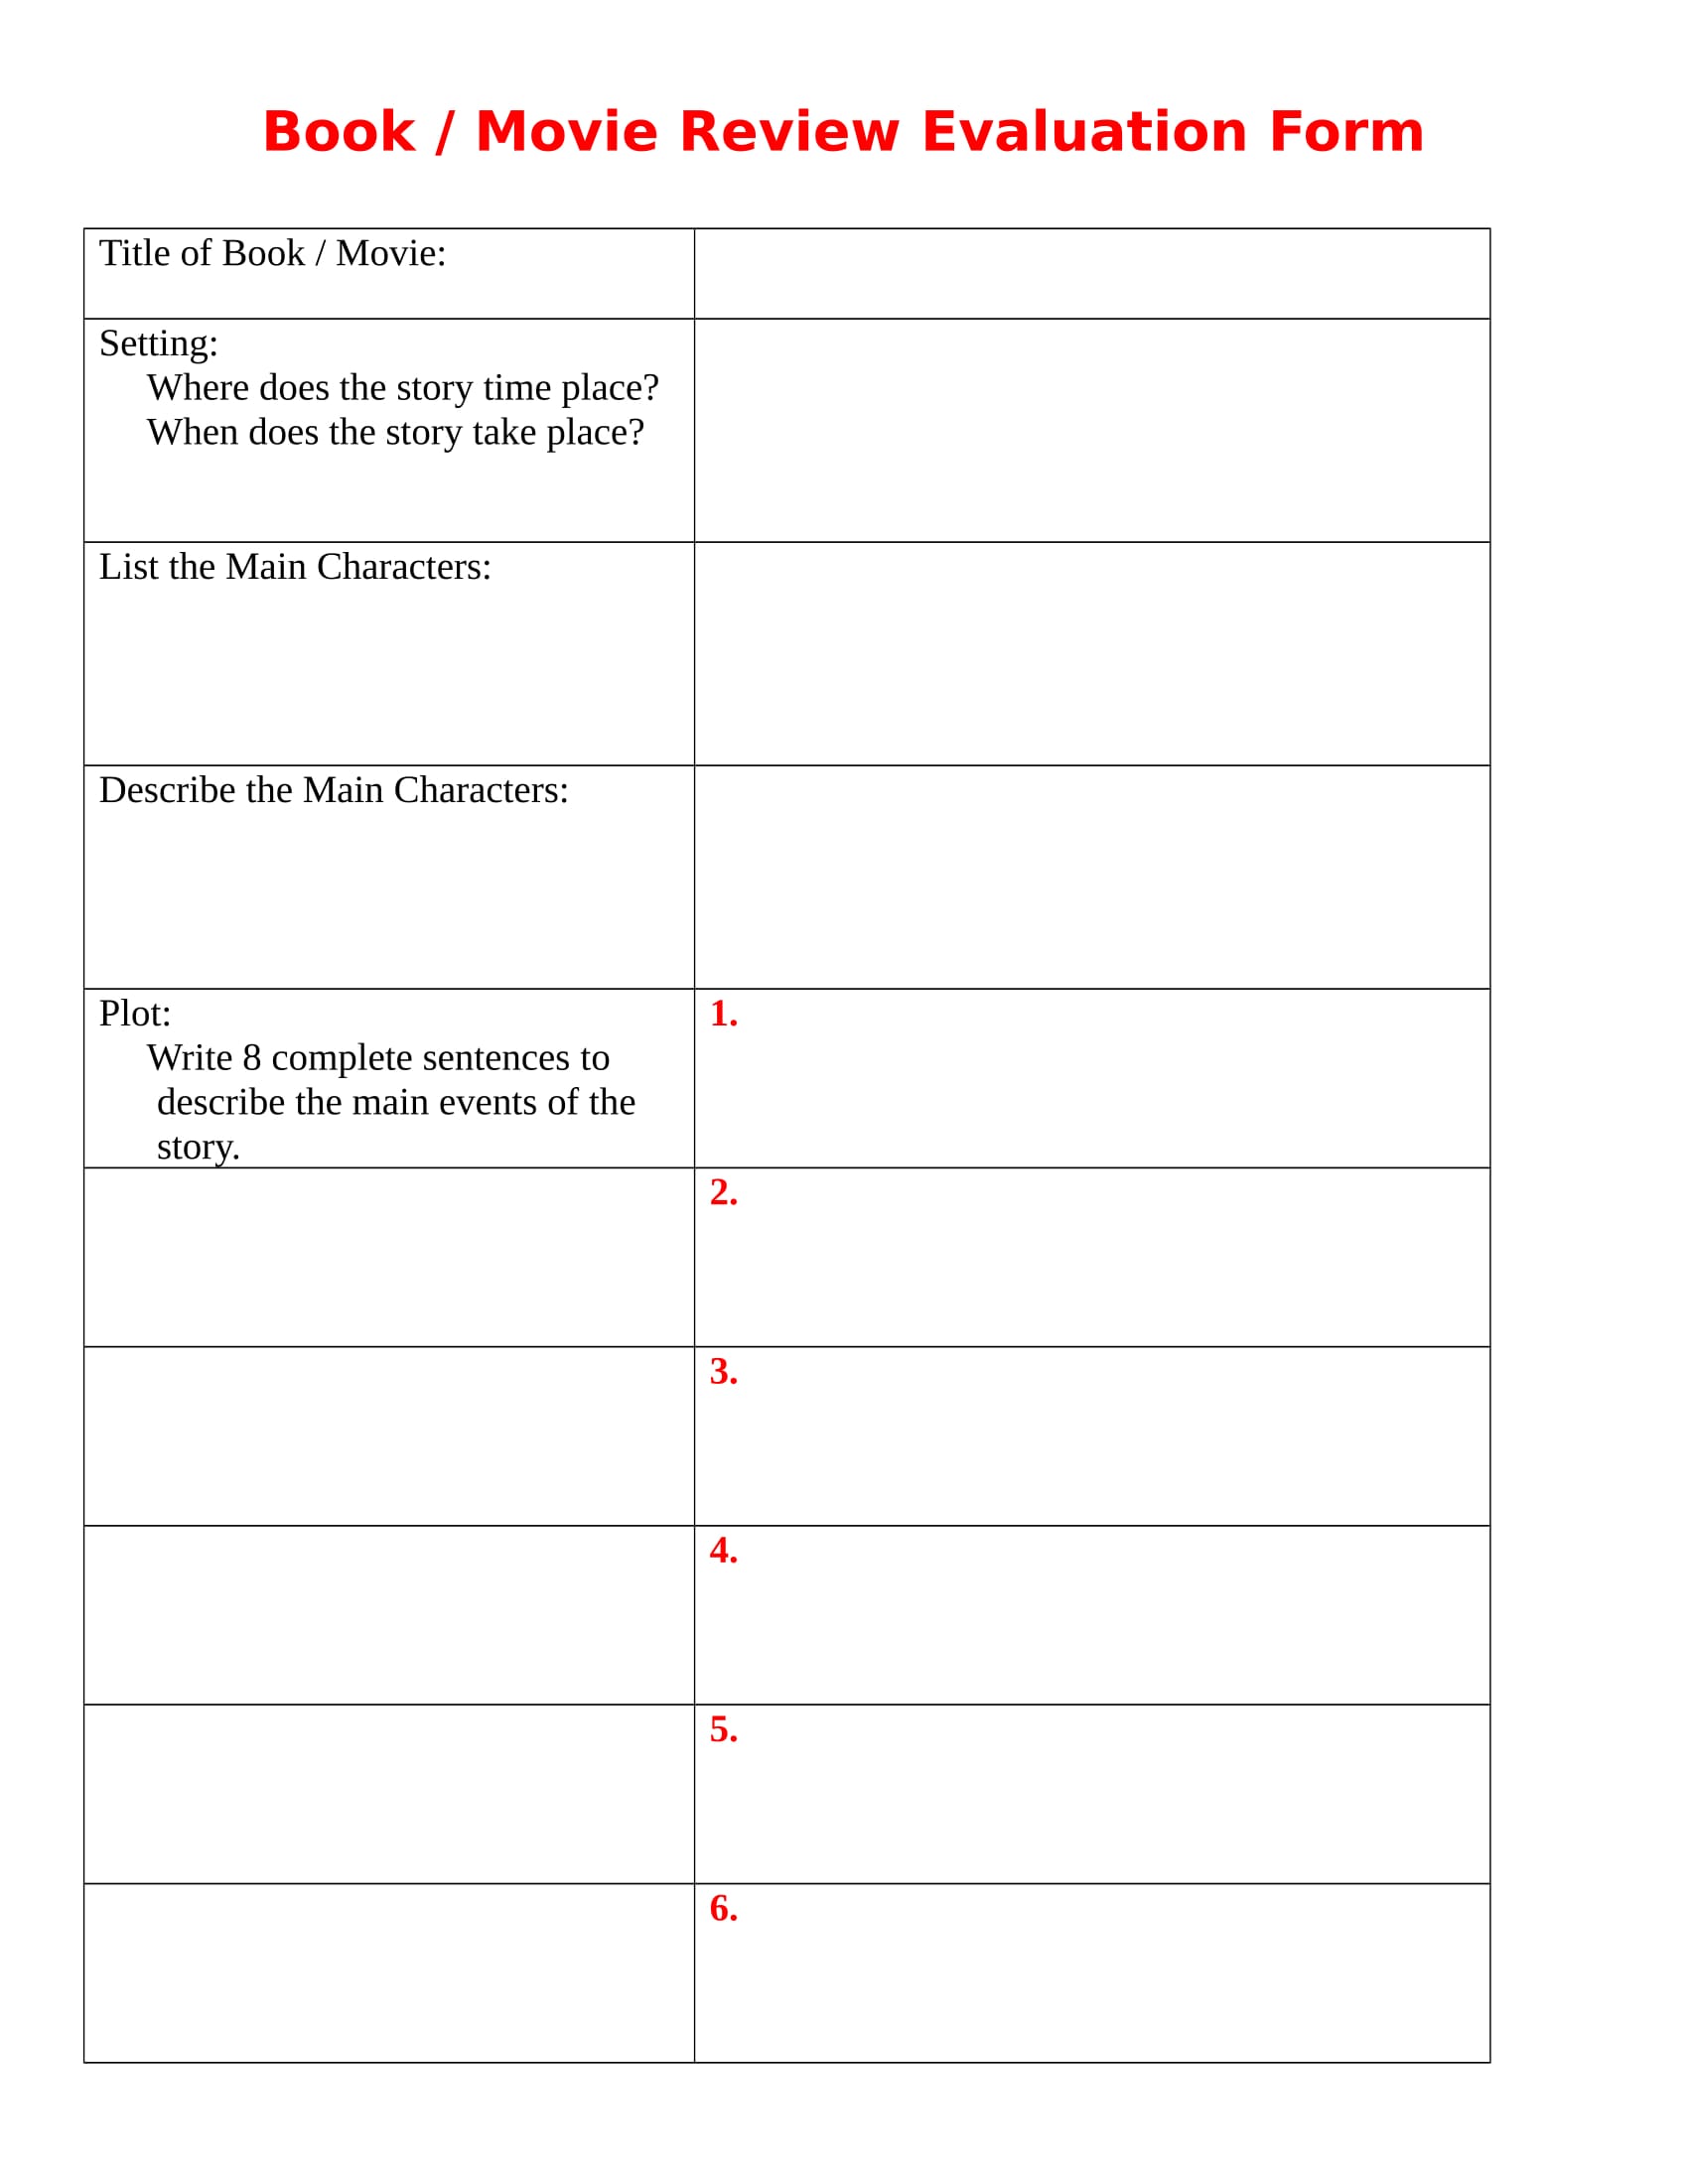 book and movie evaluation form 1